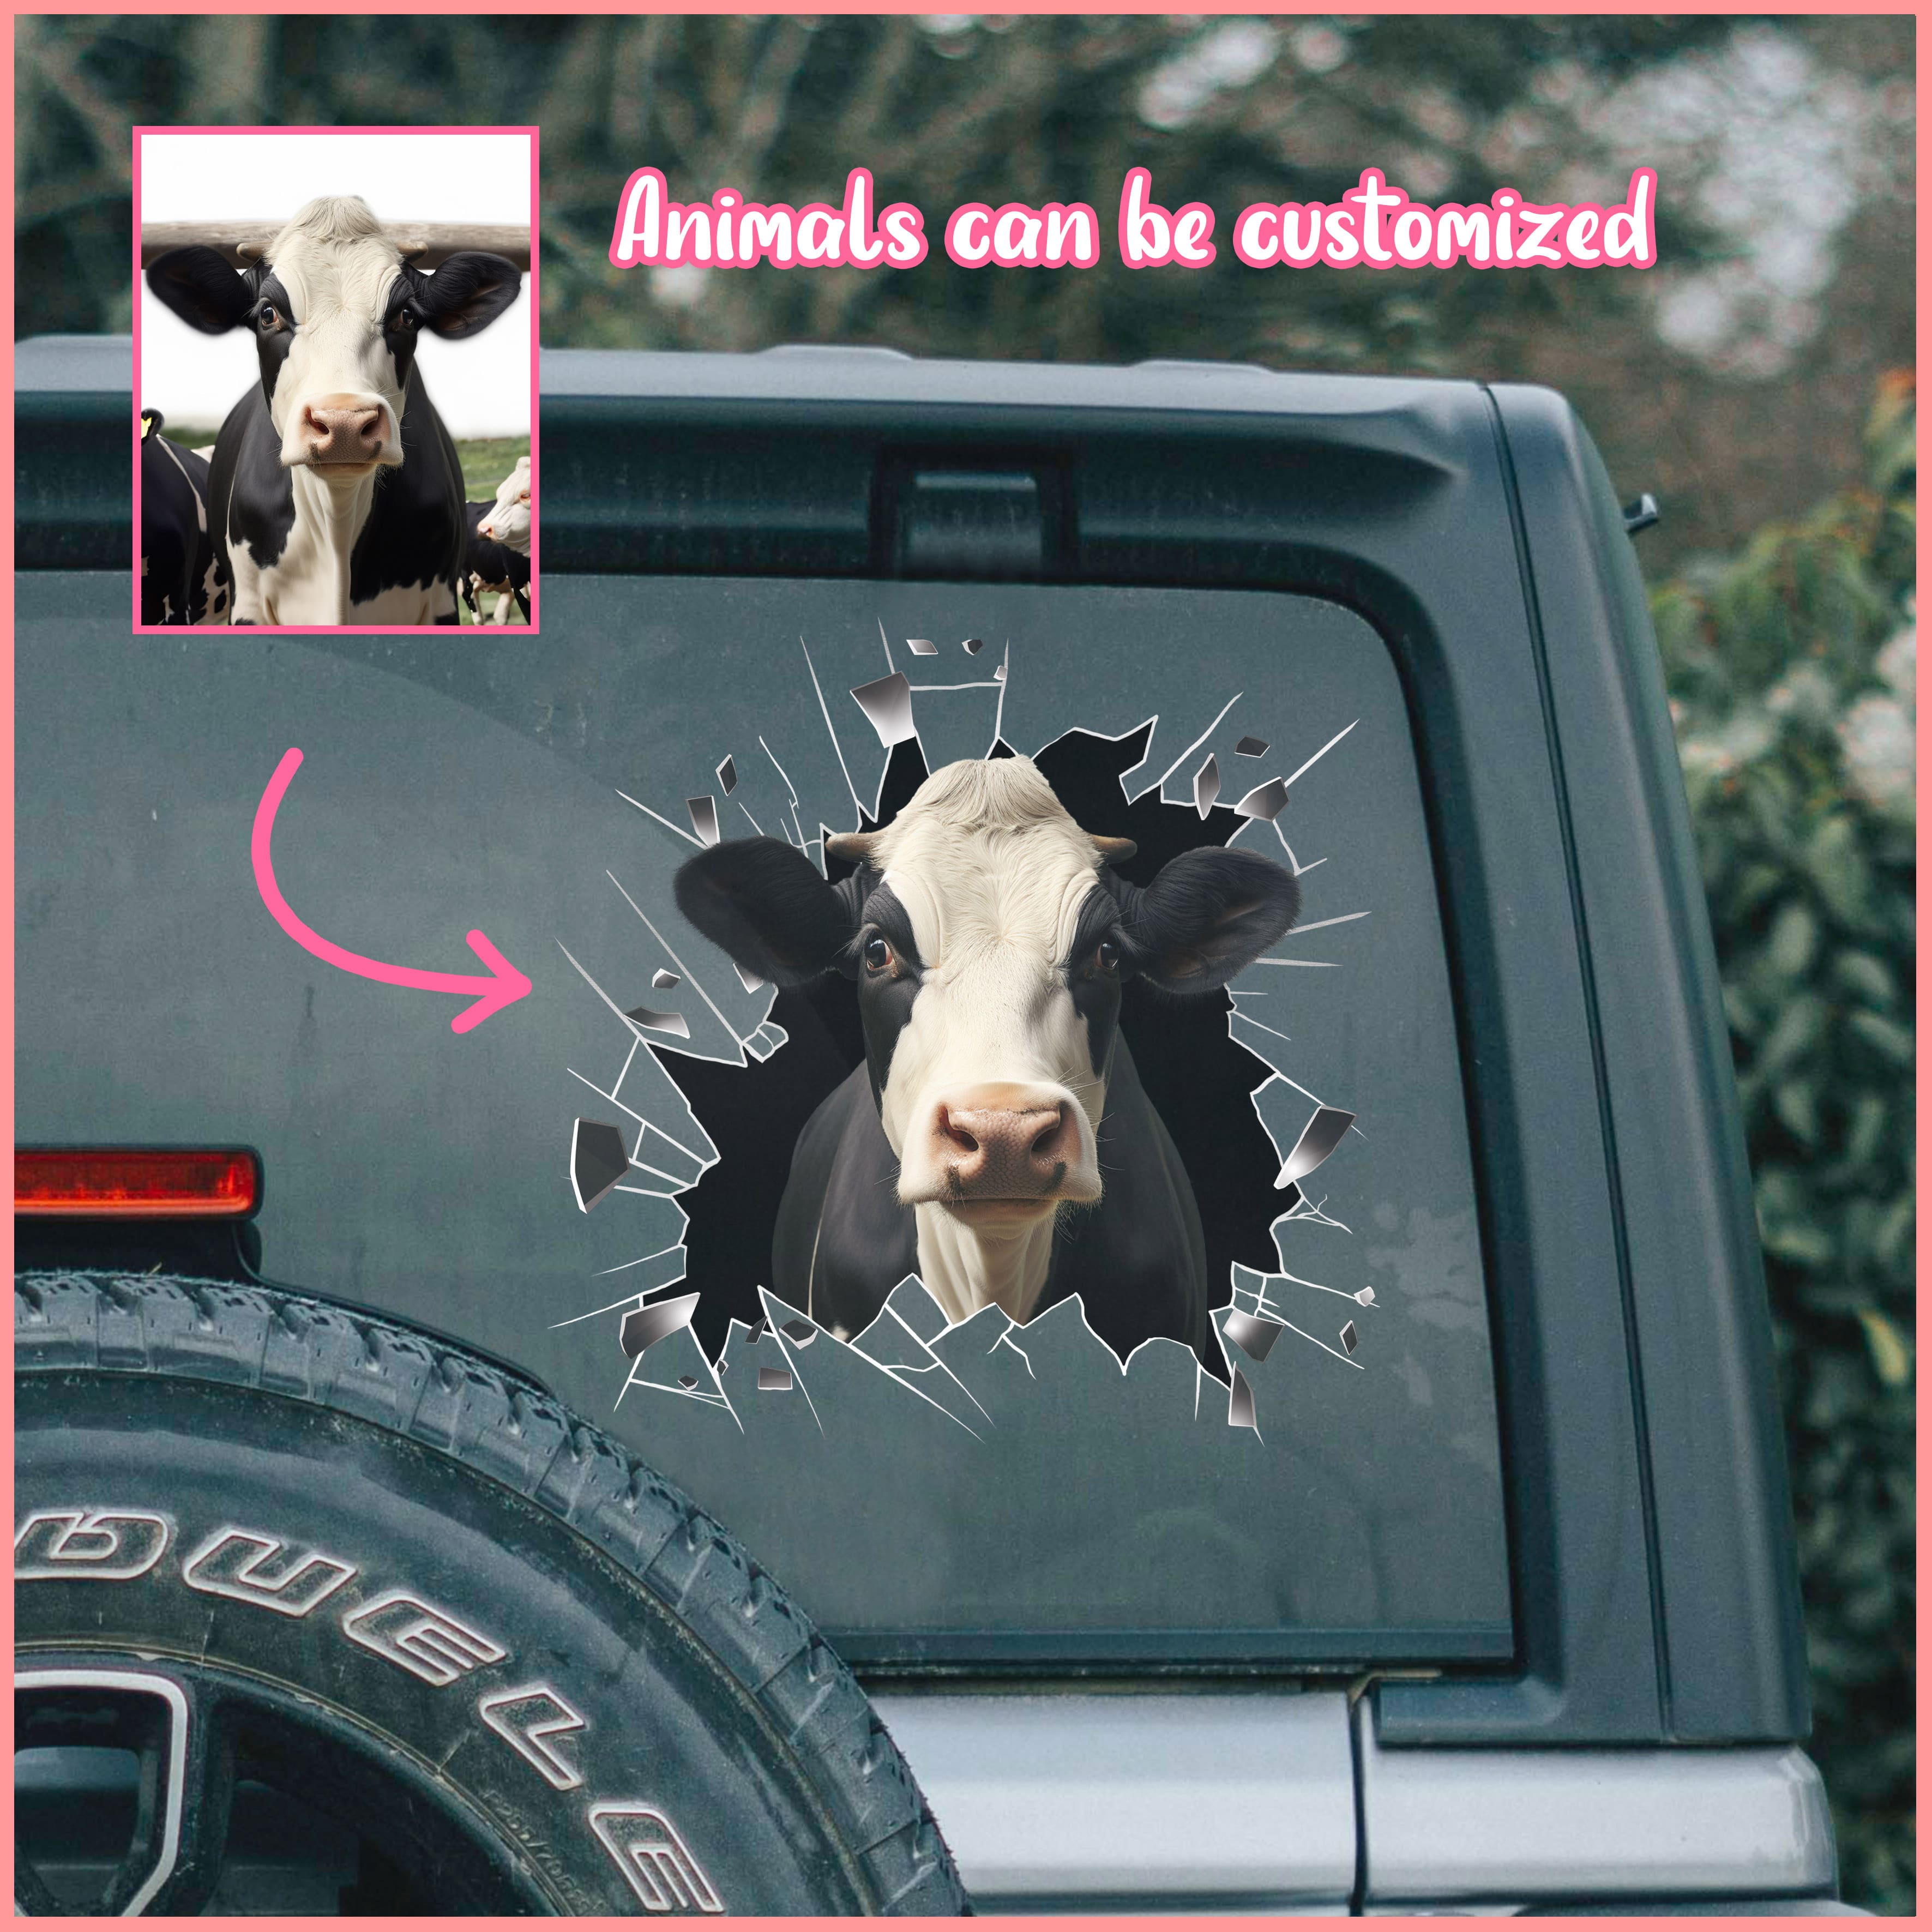 Cow car decal, Animals can be customized